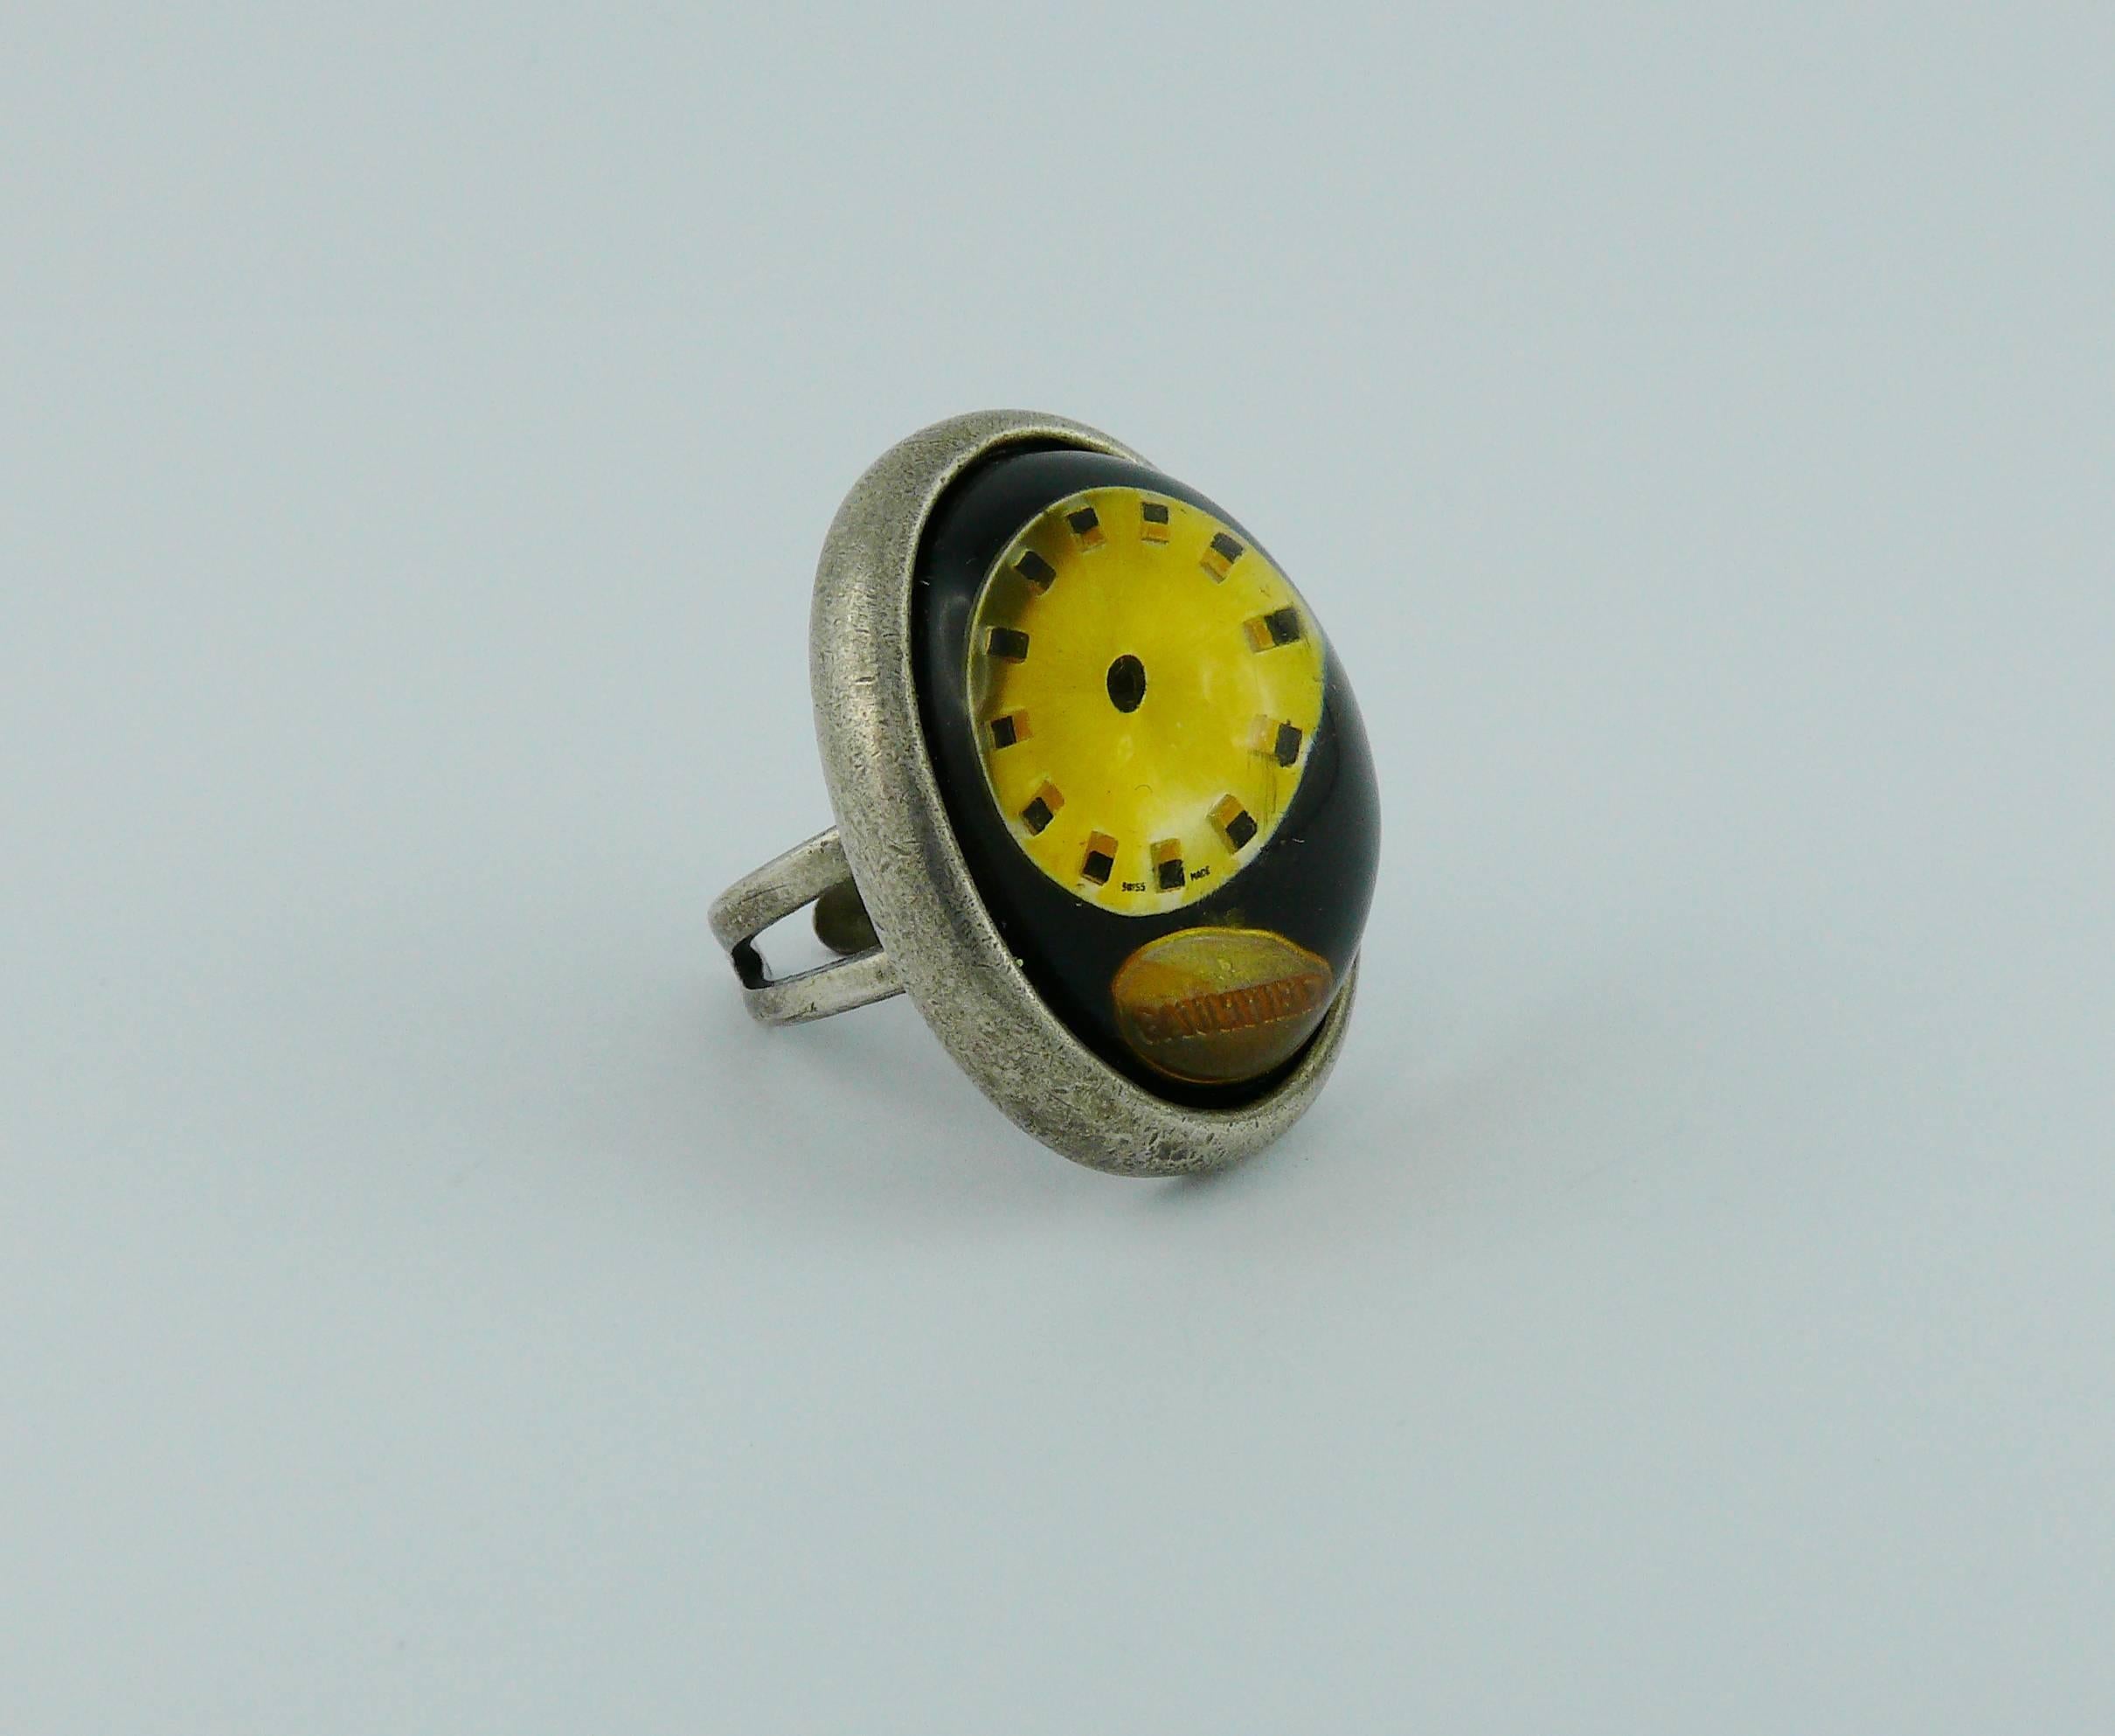 JEAN PAUL GAULTIER vintage clock ring featuring a massive domed resin cabochon in a silver tone with antique patina setting.

Marked GAULTIER.

Indicative measurements : inner circumference approx. 5.03 cm (1.98 inches) / length approx. 3.3 cm (1.30